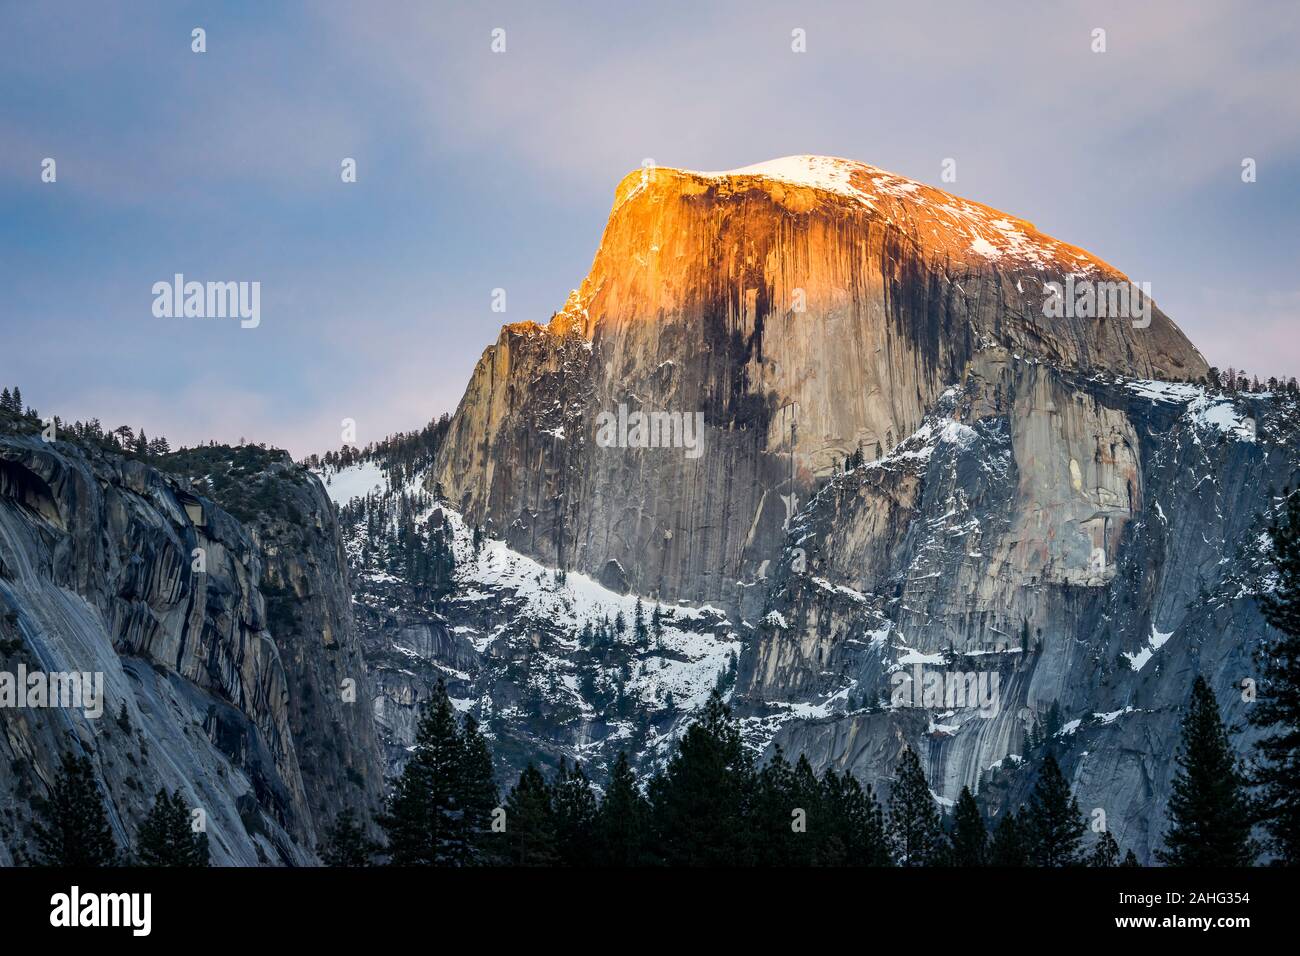 Landscape image of snow-capped Half Dome, Yosemite National Park, with alpenglow Stock Photo